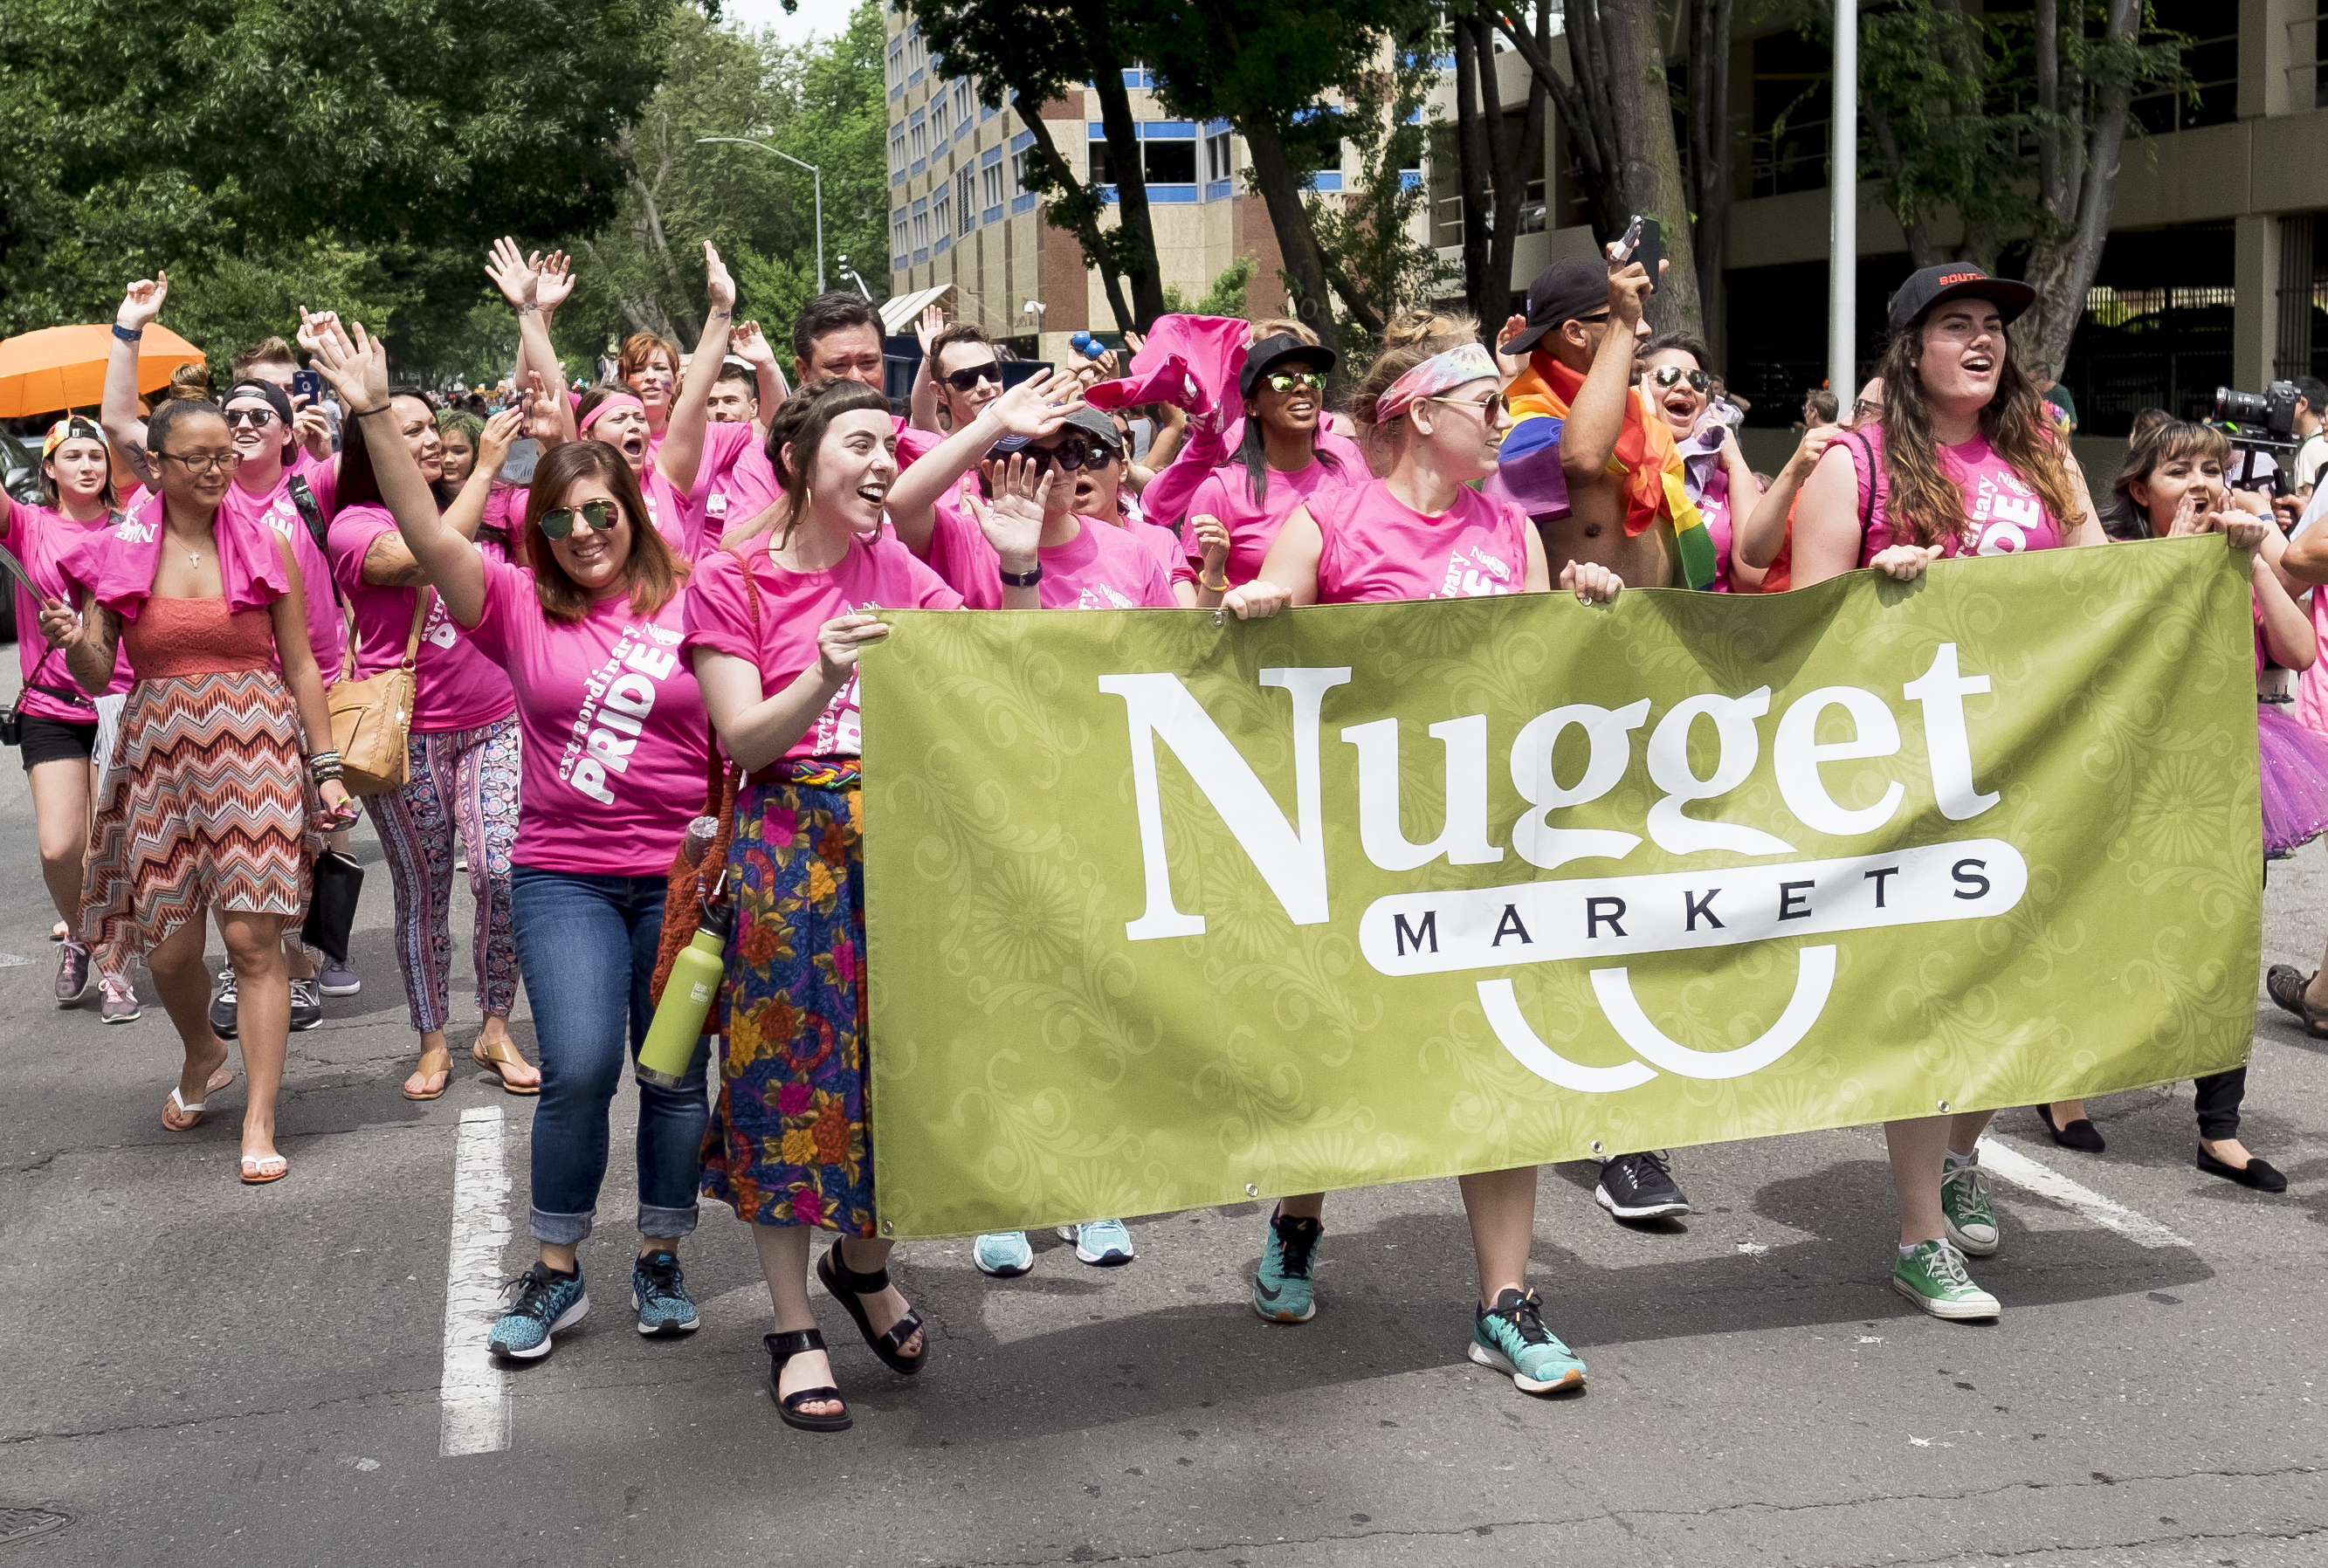 Nugget Associates in the parade